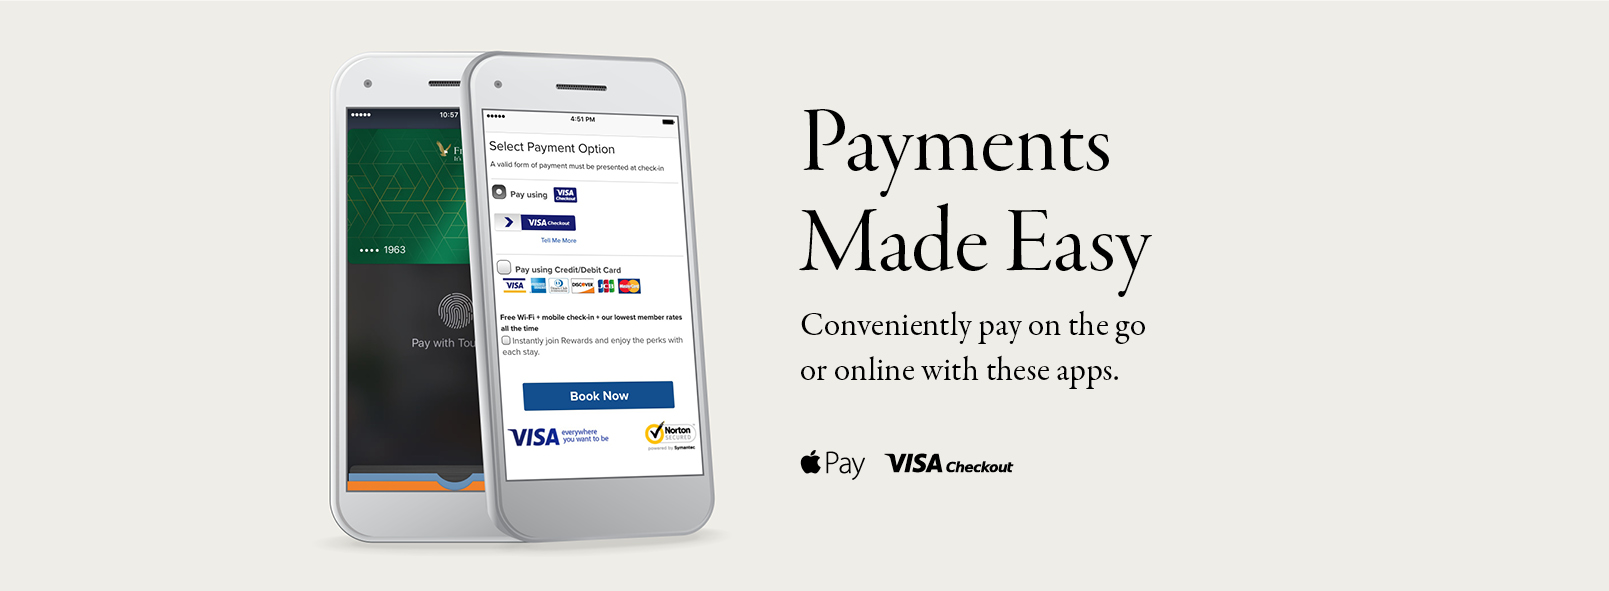 Digital payments made easy via Apple Pay and Visa Checkout